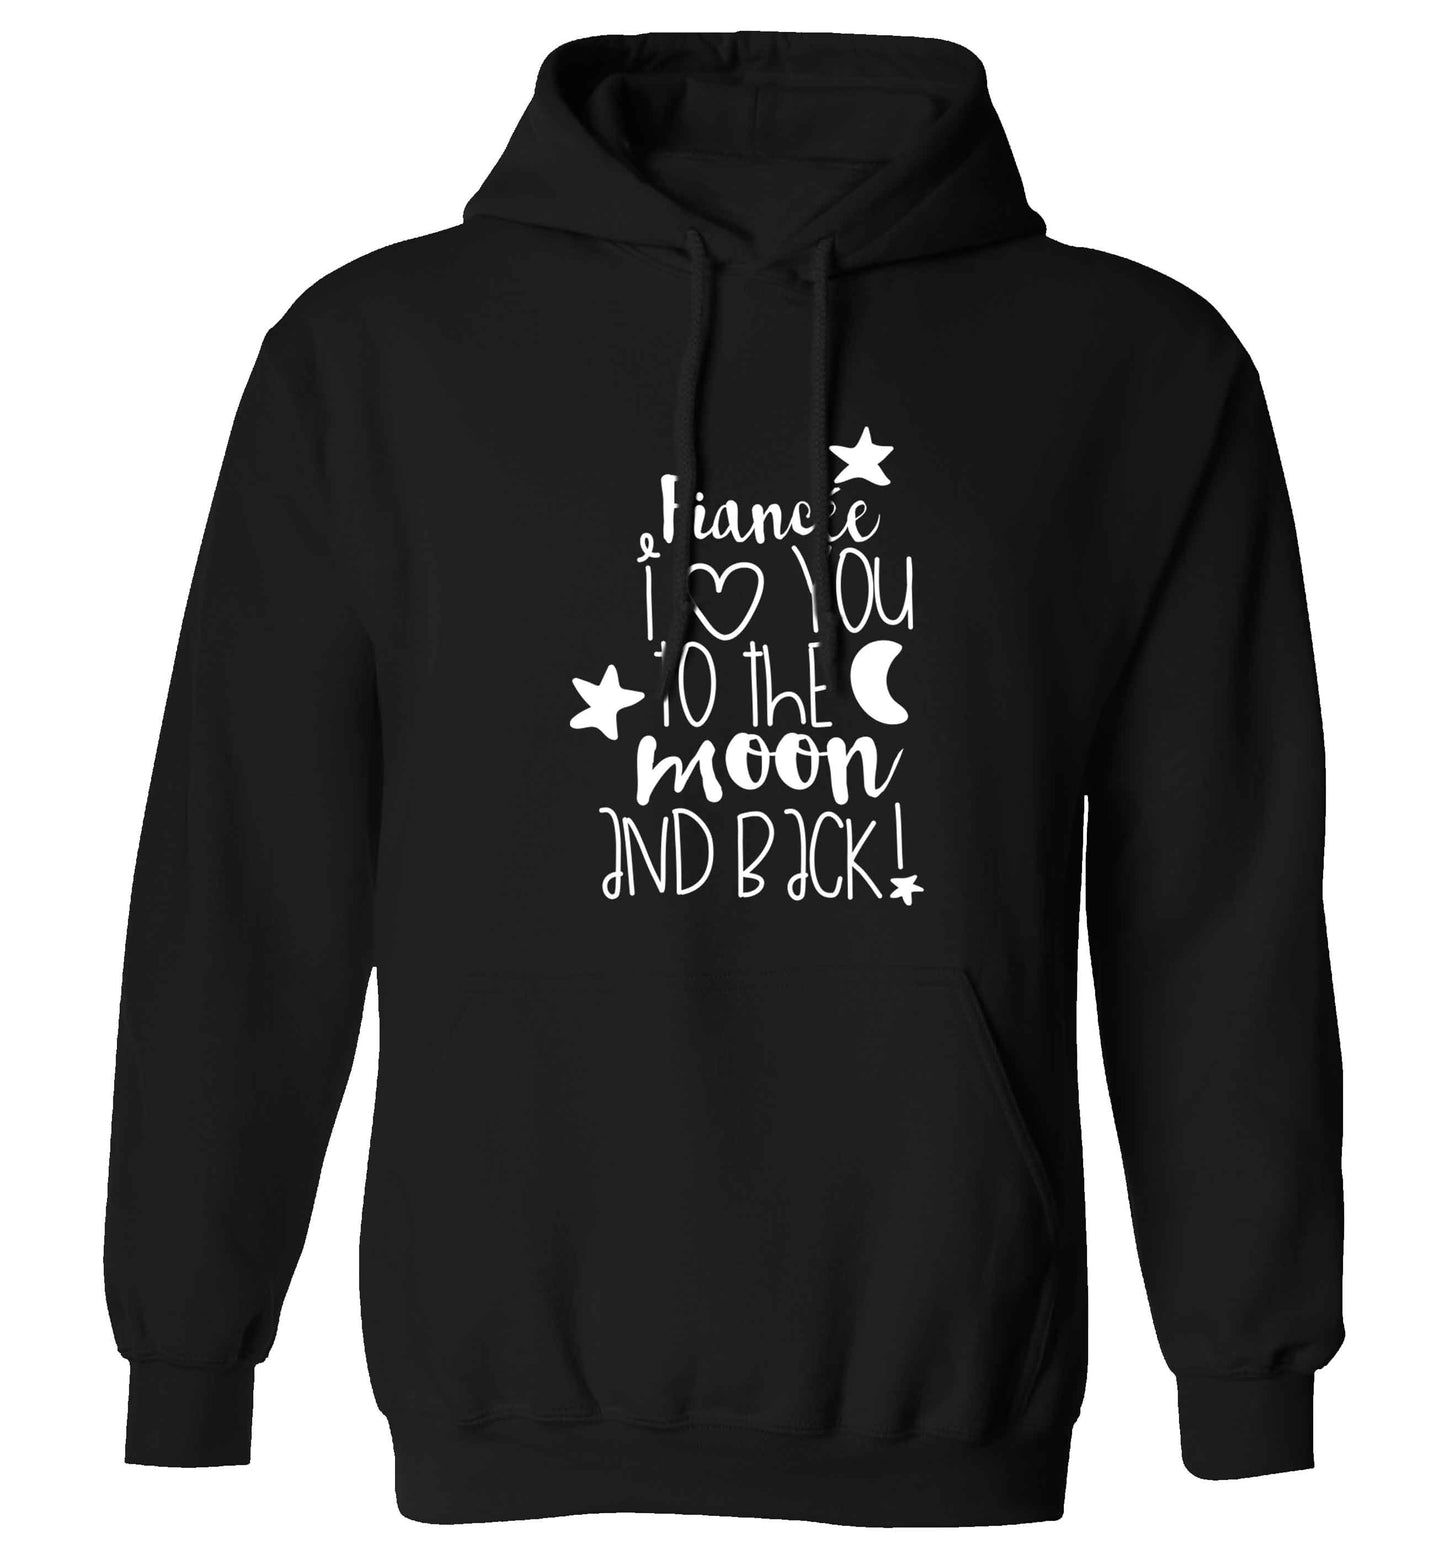 Fianc√©e I love you to the moon and back adults unisex black hoodie 2XL